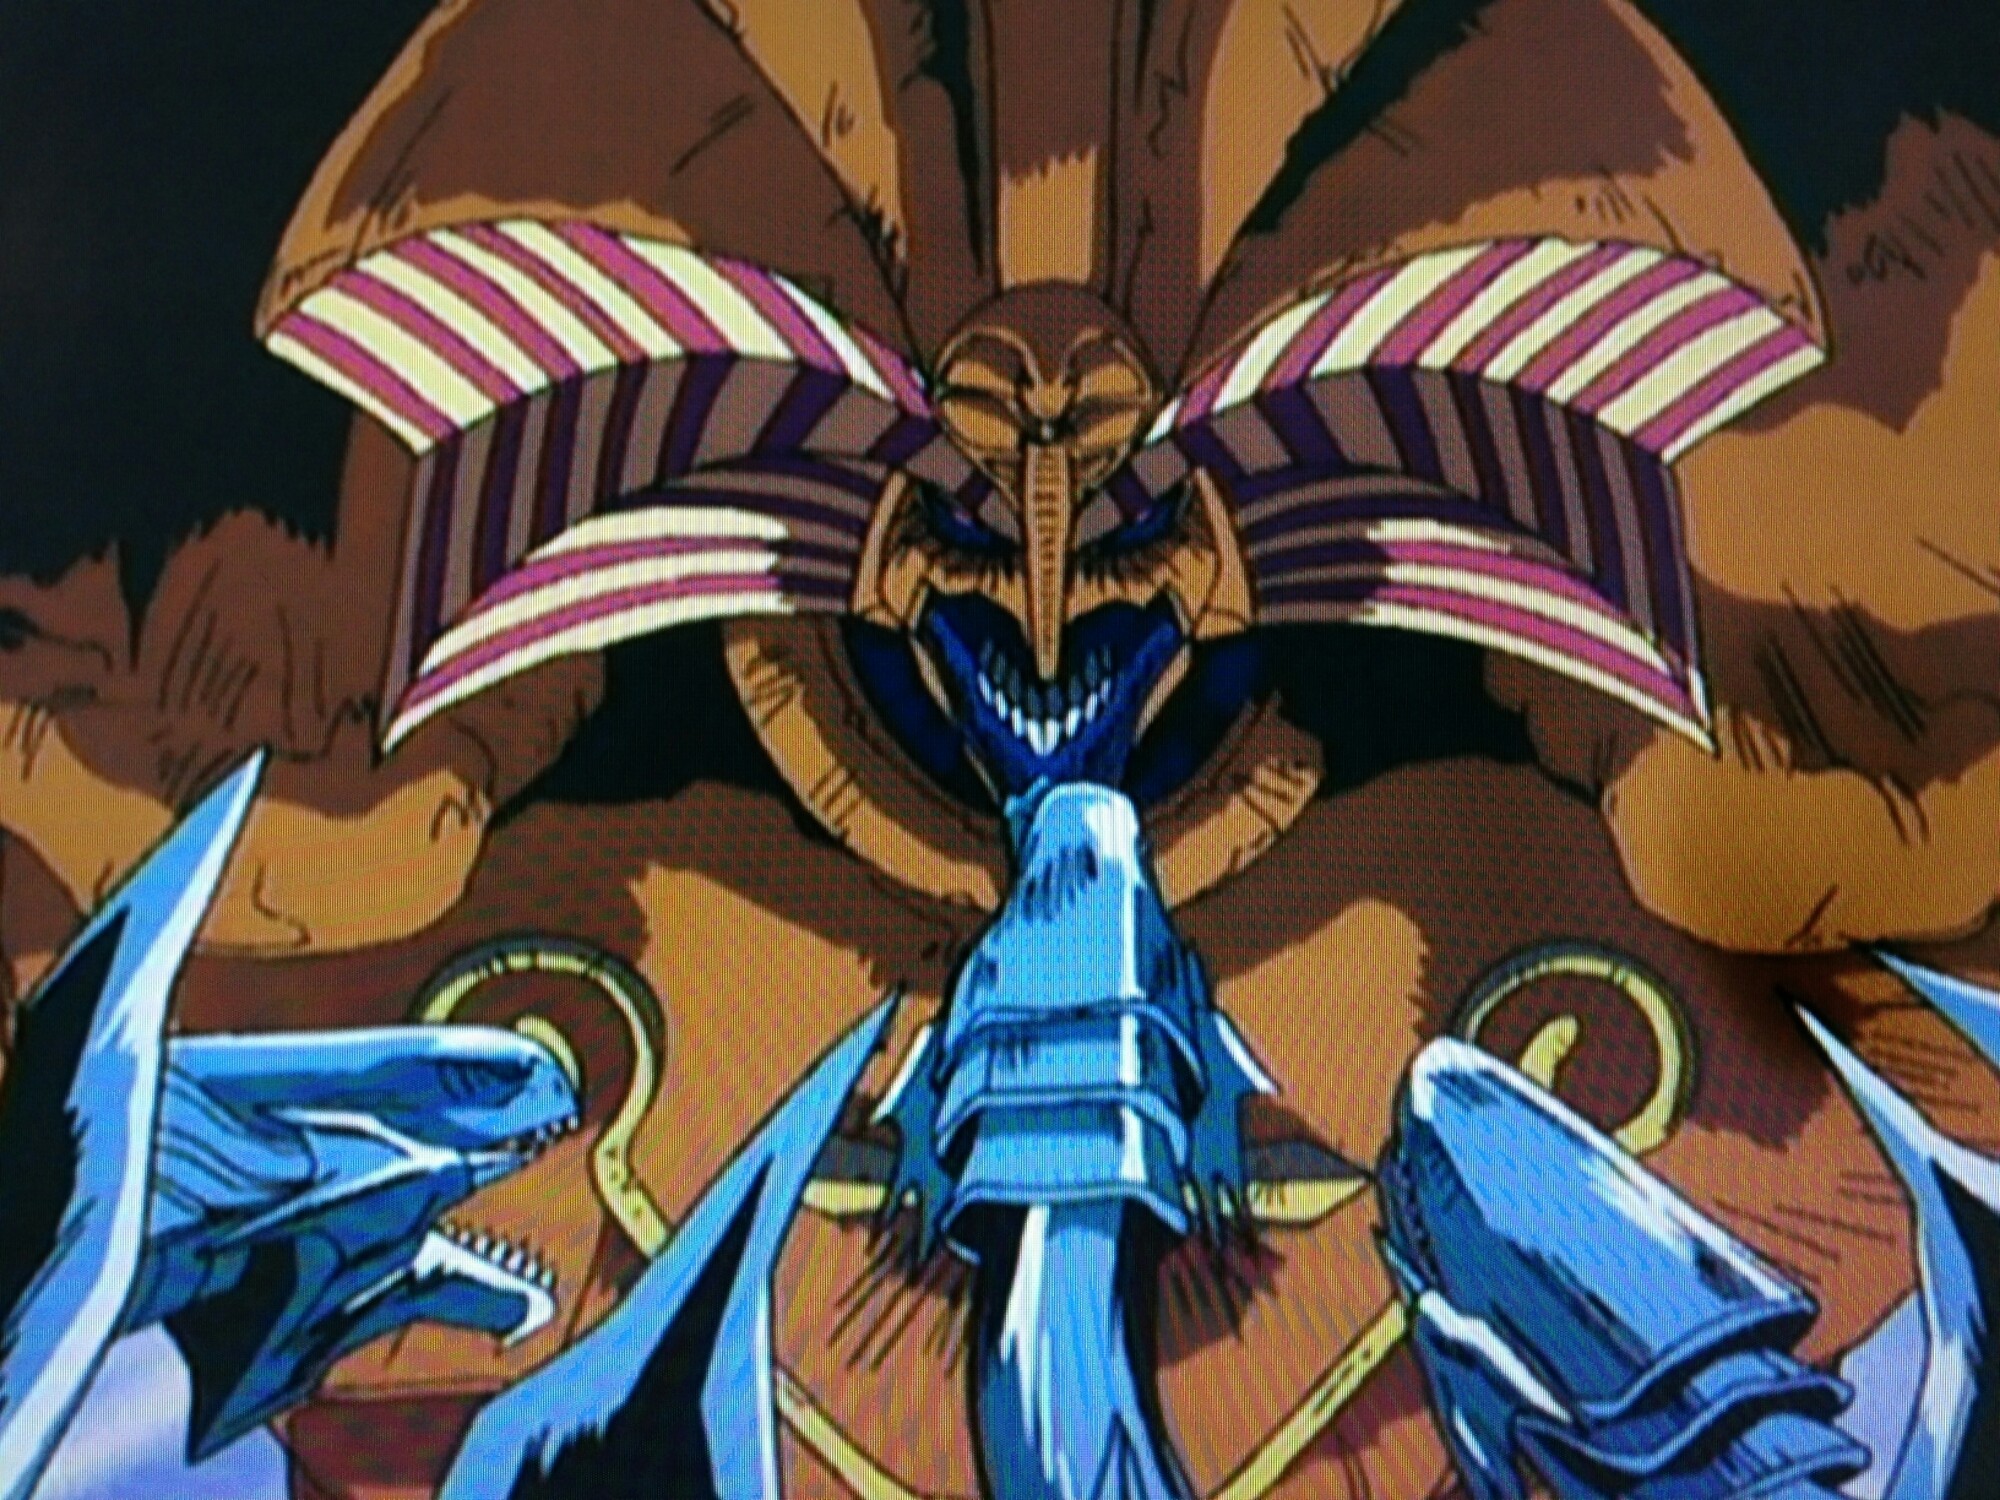 2000x1500 ... download Yu-Gi-Oh! Duel Monsters image